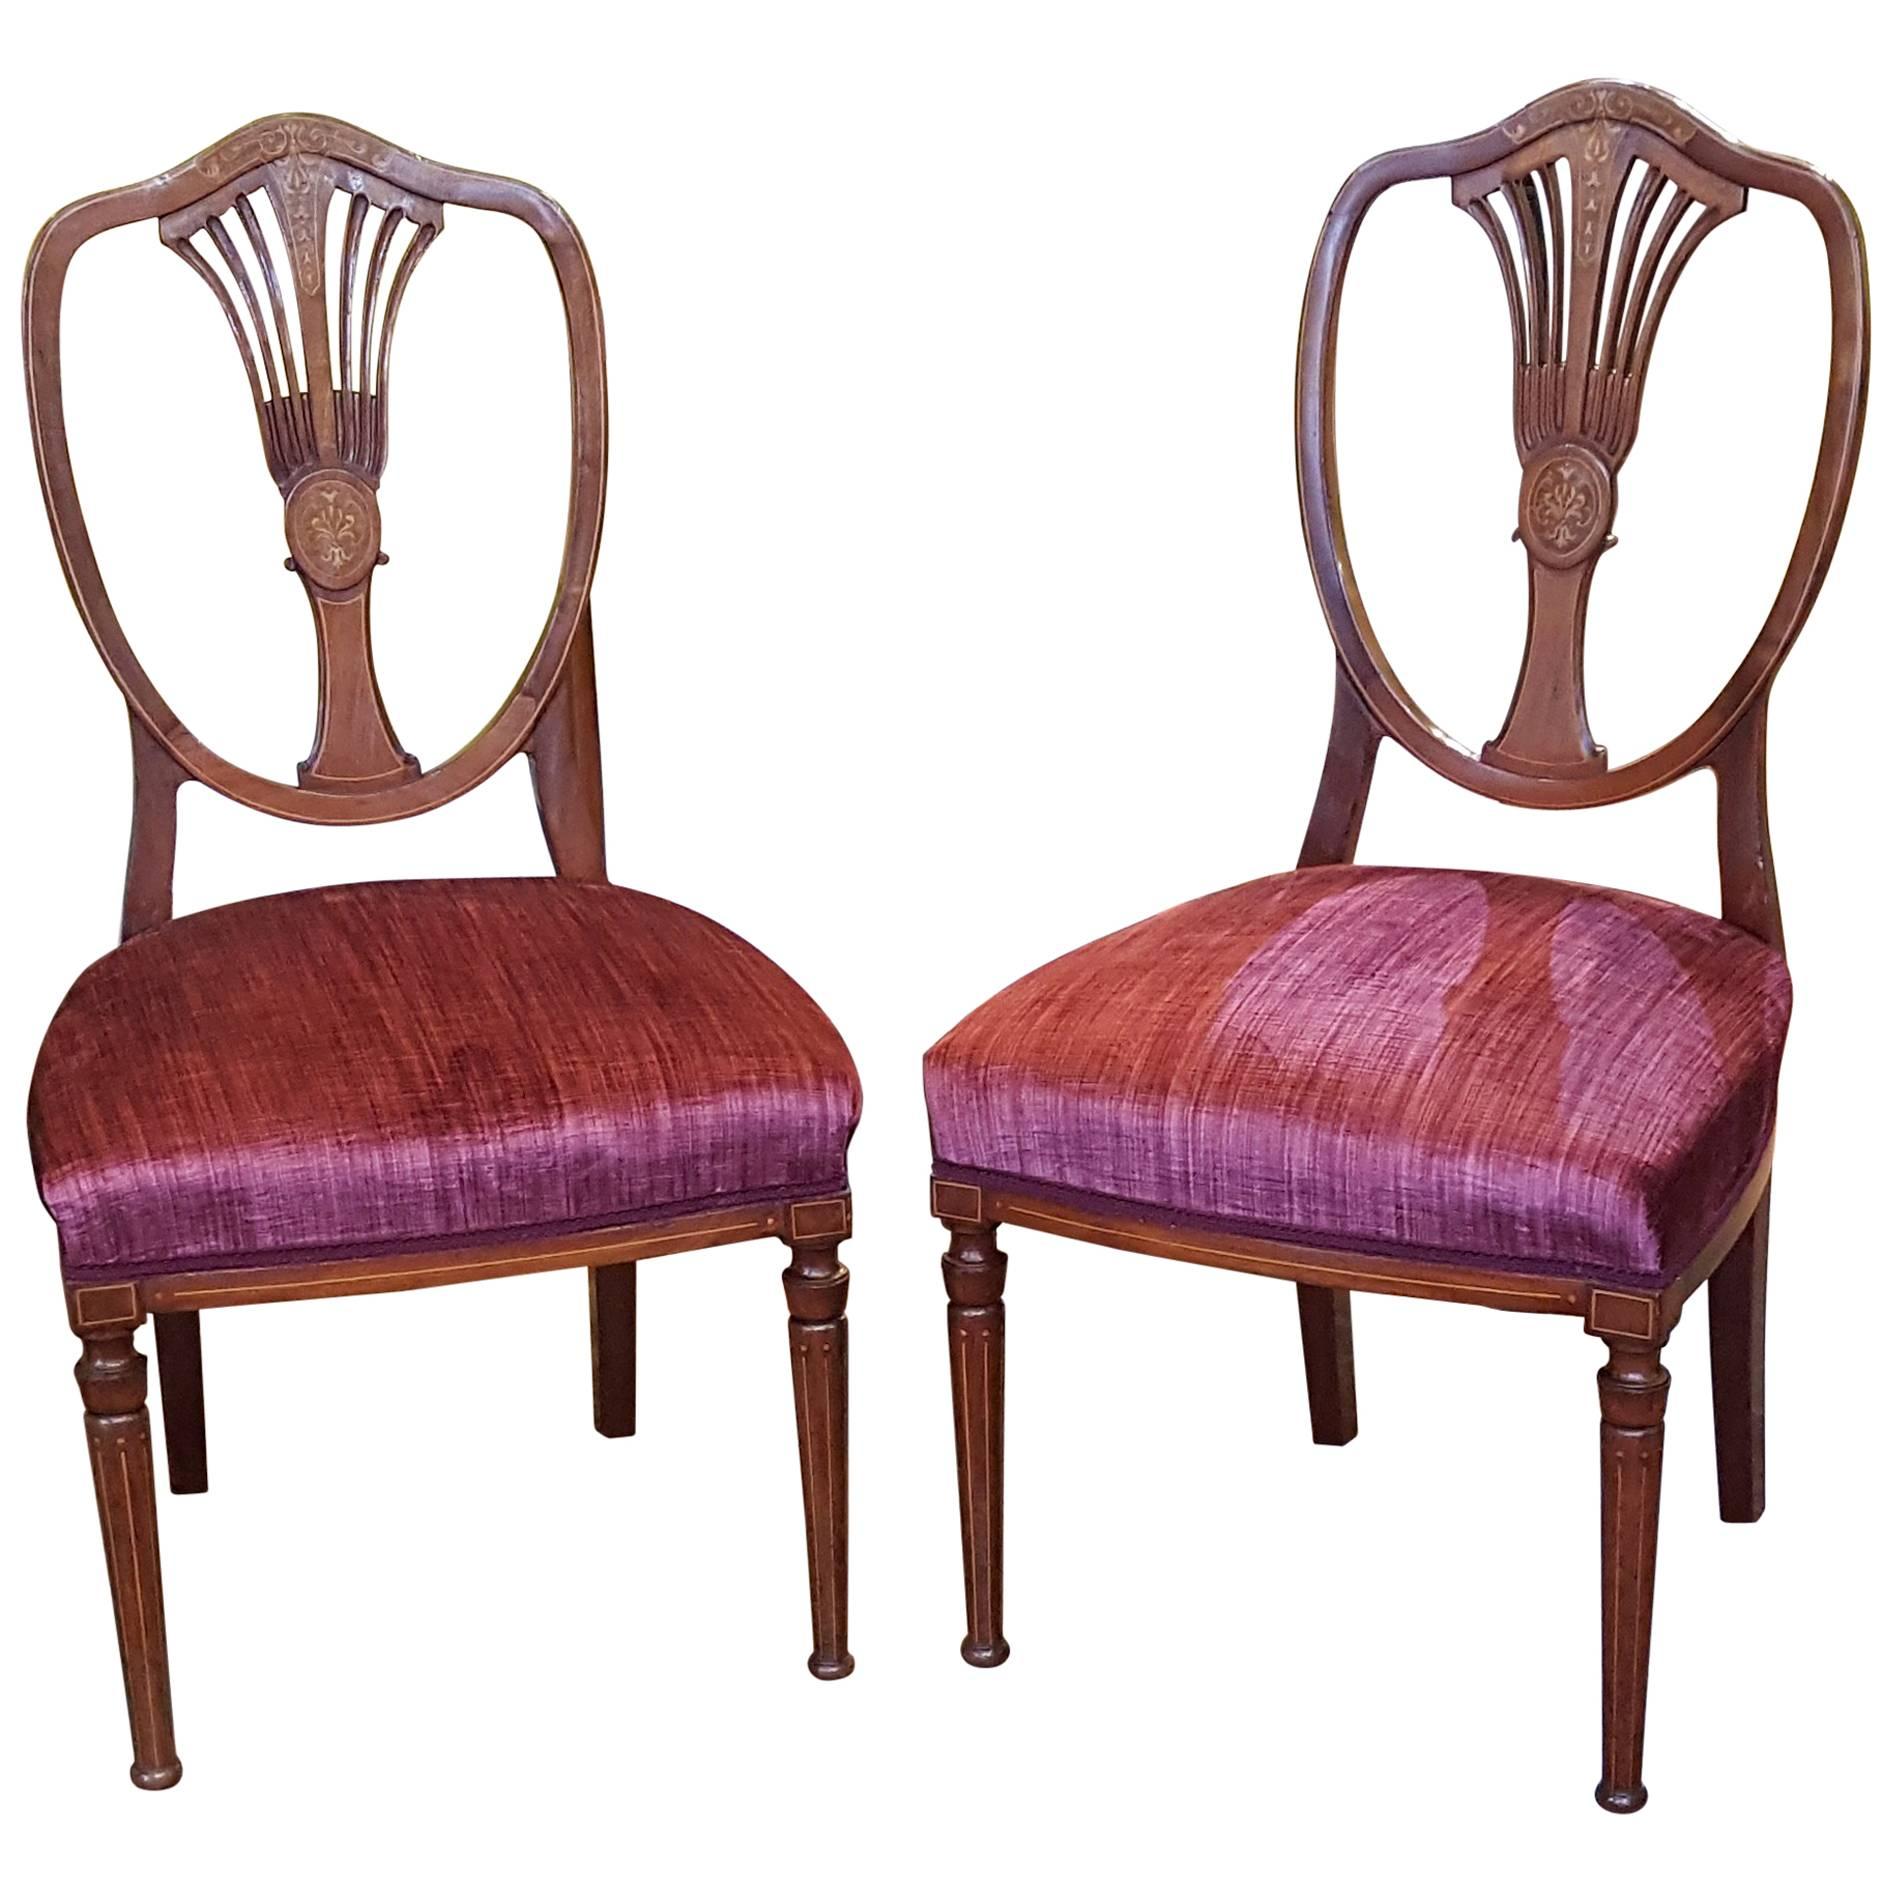 Pair of Edwardian Mahogany and Marquetry Chairs